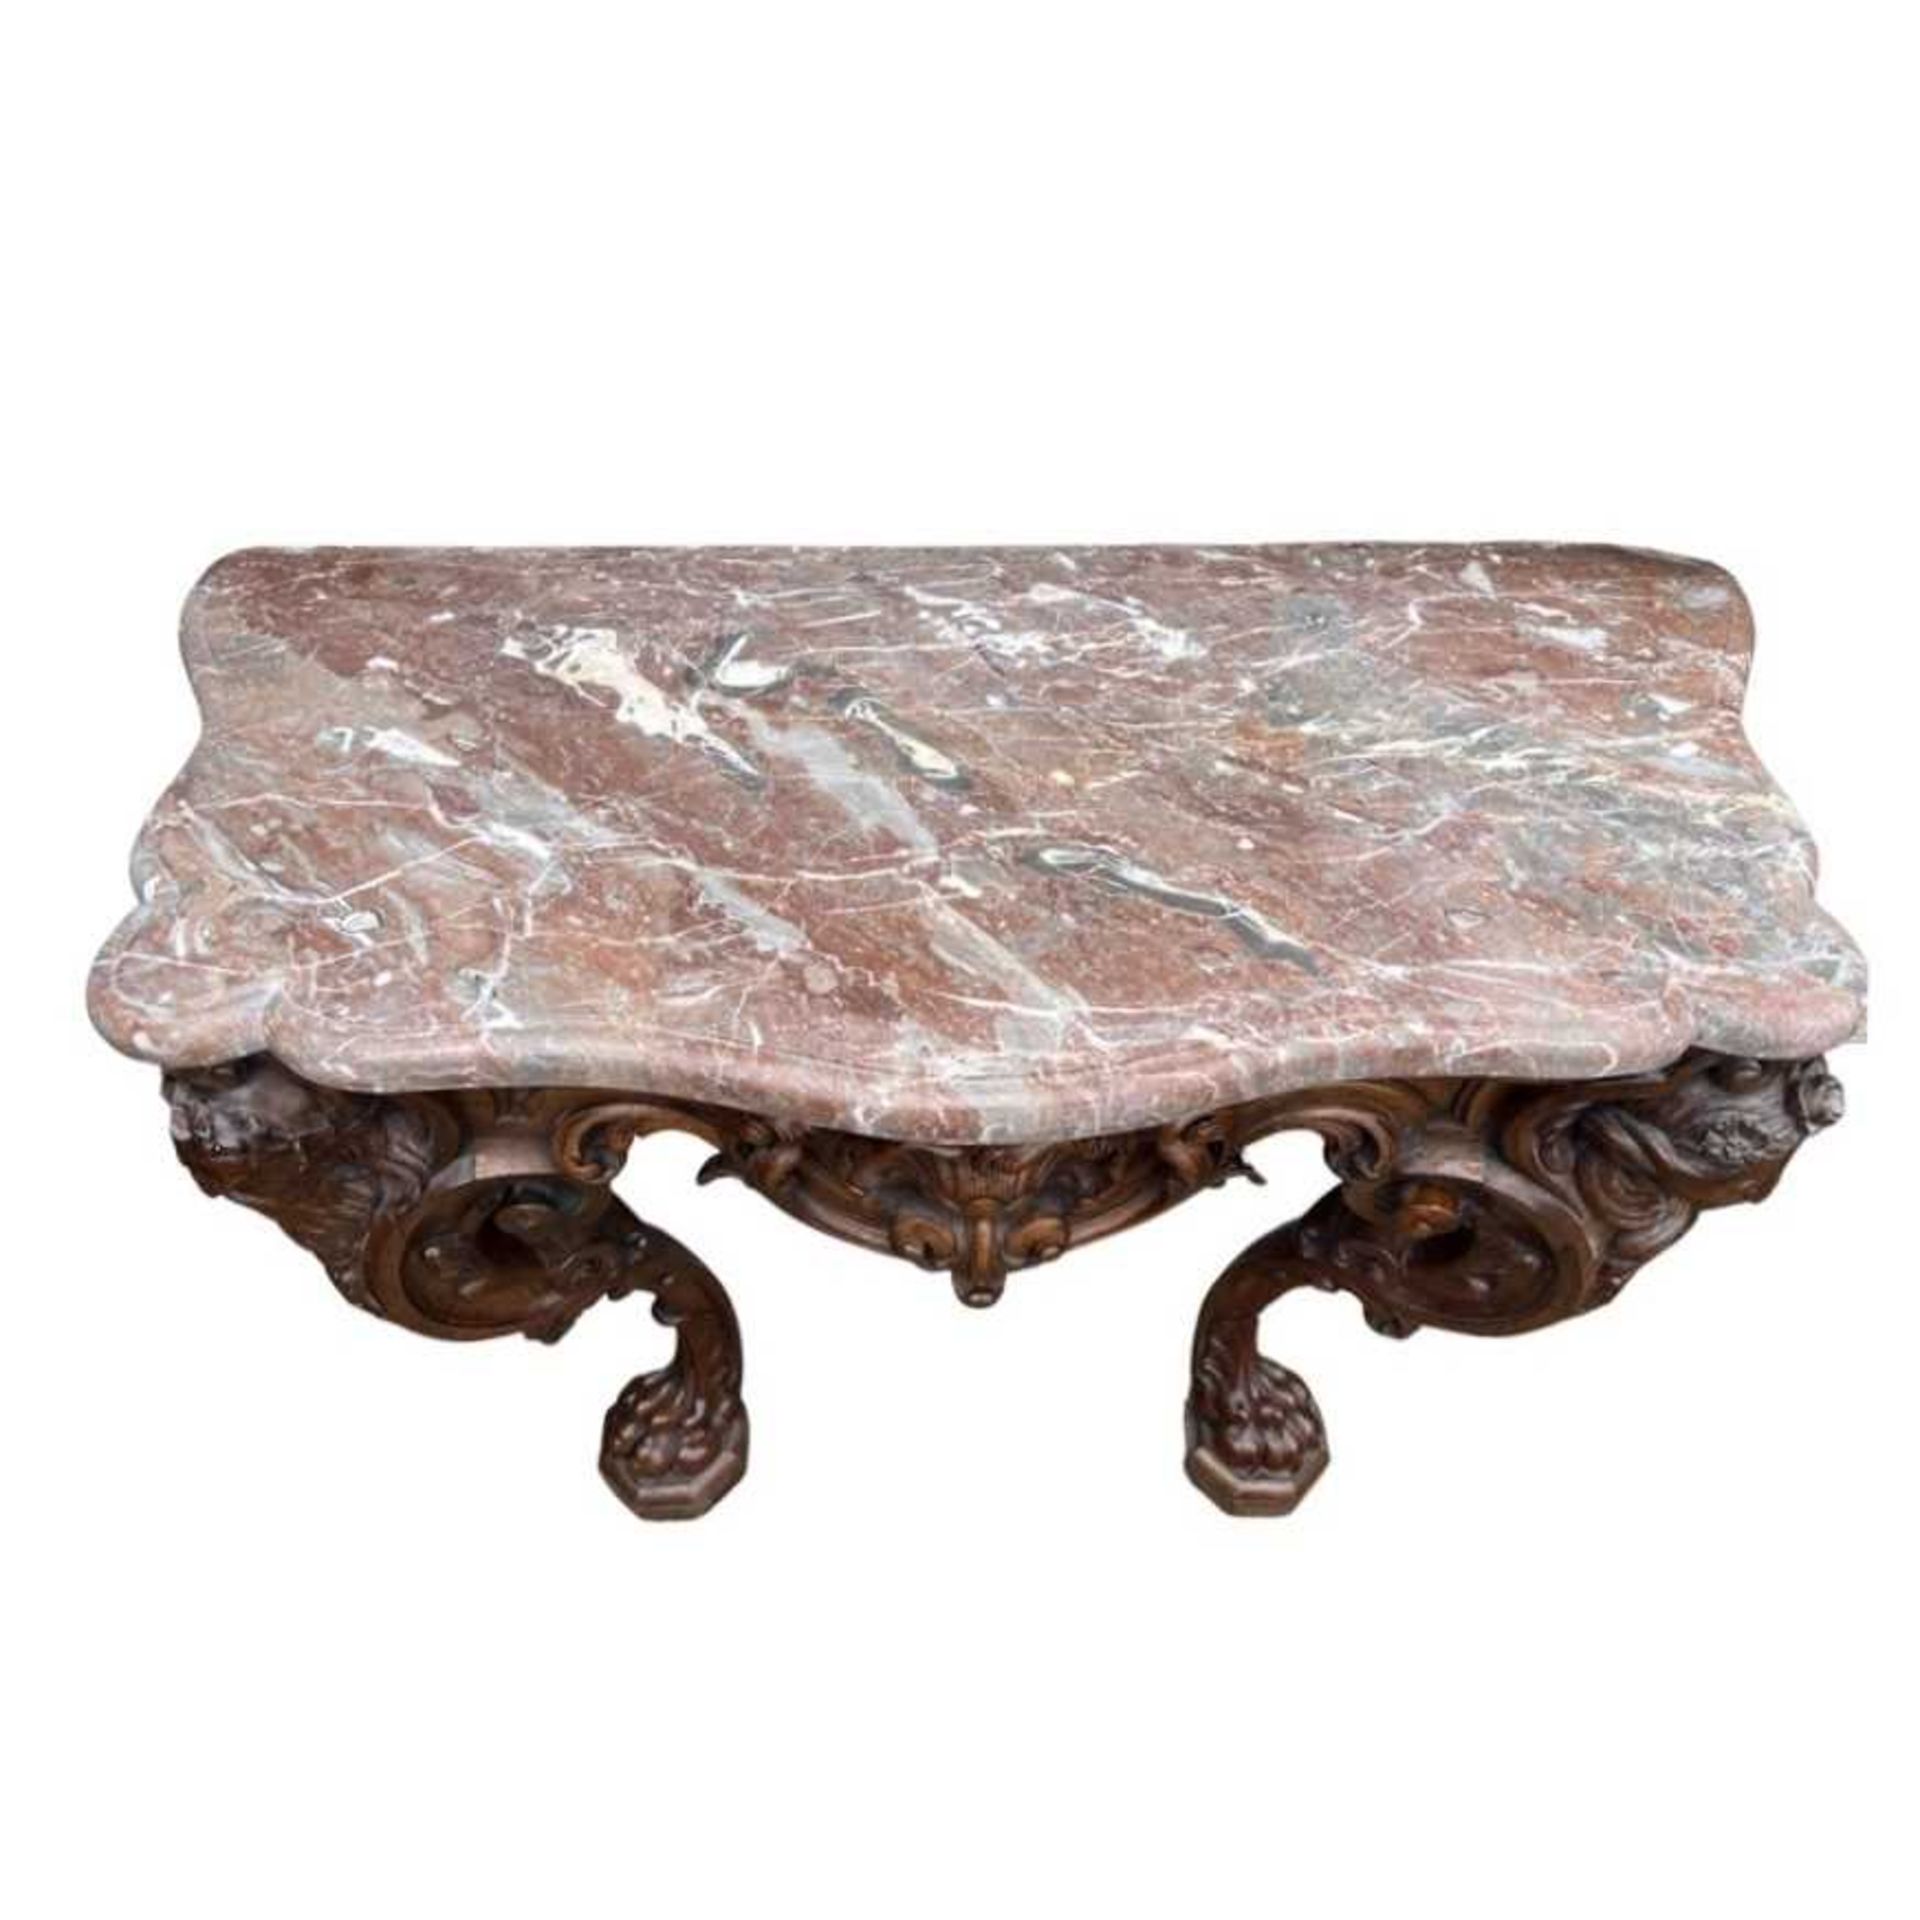 A FINE 19TH CENTURY IRISH WALNUT AND MARBLE CONSOLE TABLE - Image 2 of 5